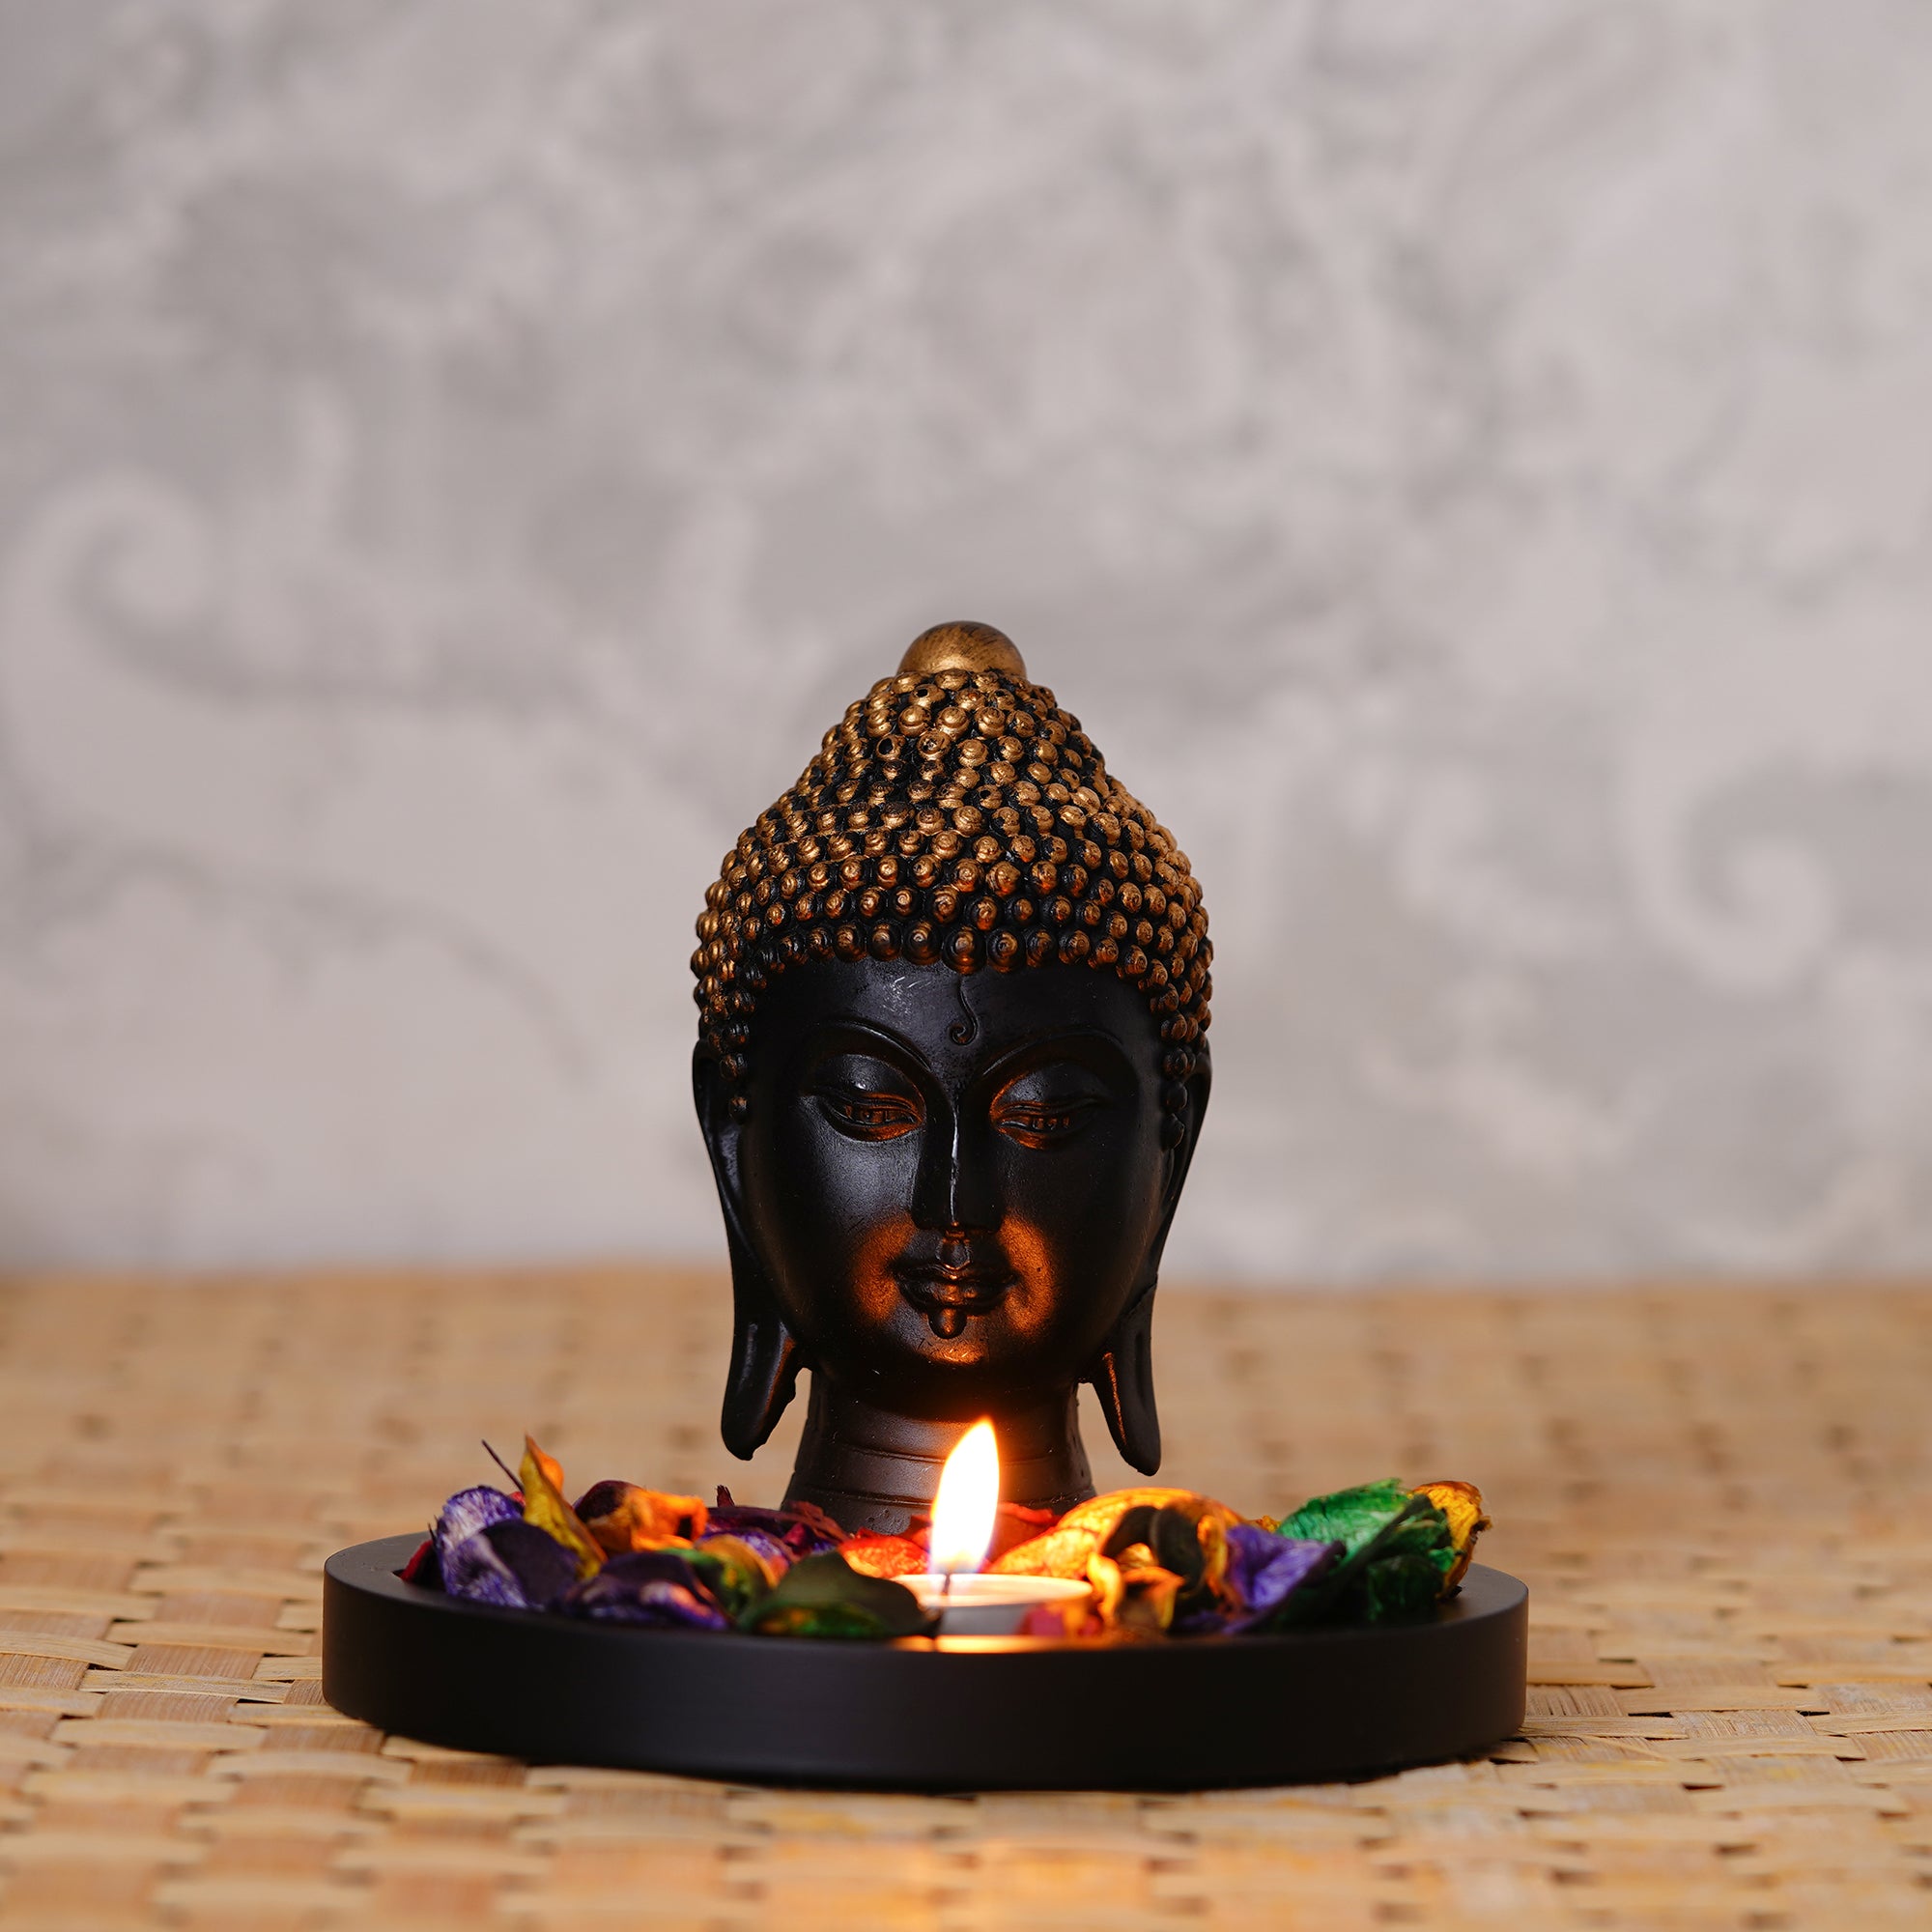 Decorative Black and Golden Buddha Head Statue with Wooden Base, Fragranced Petals and Tealight